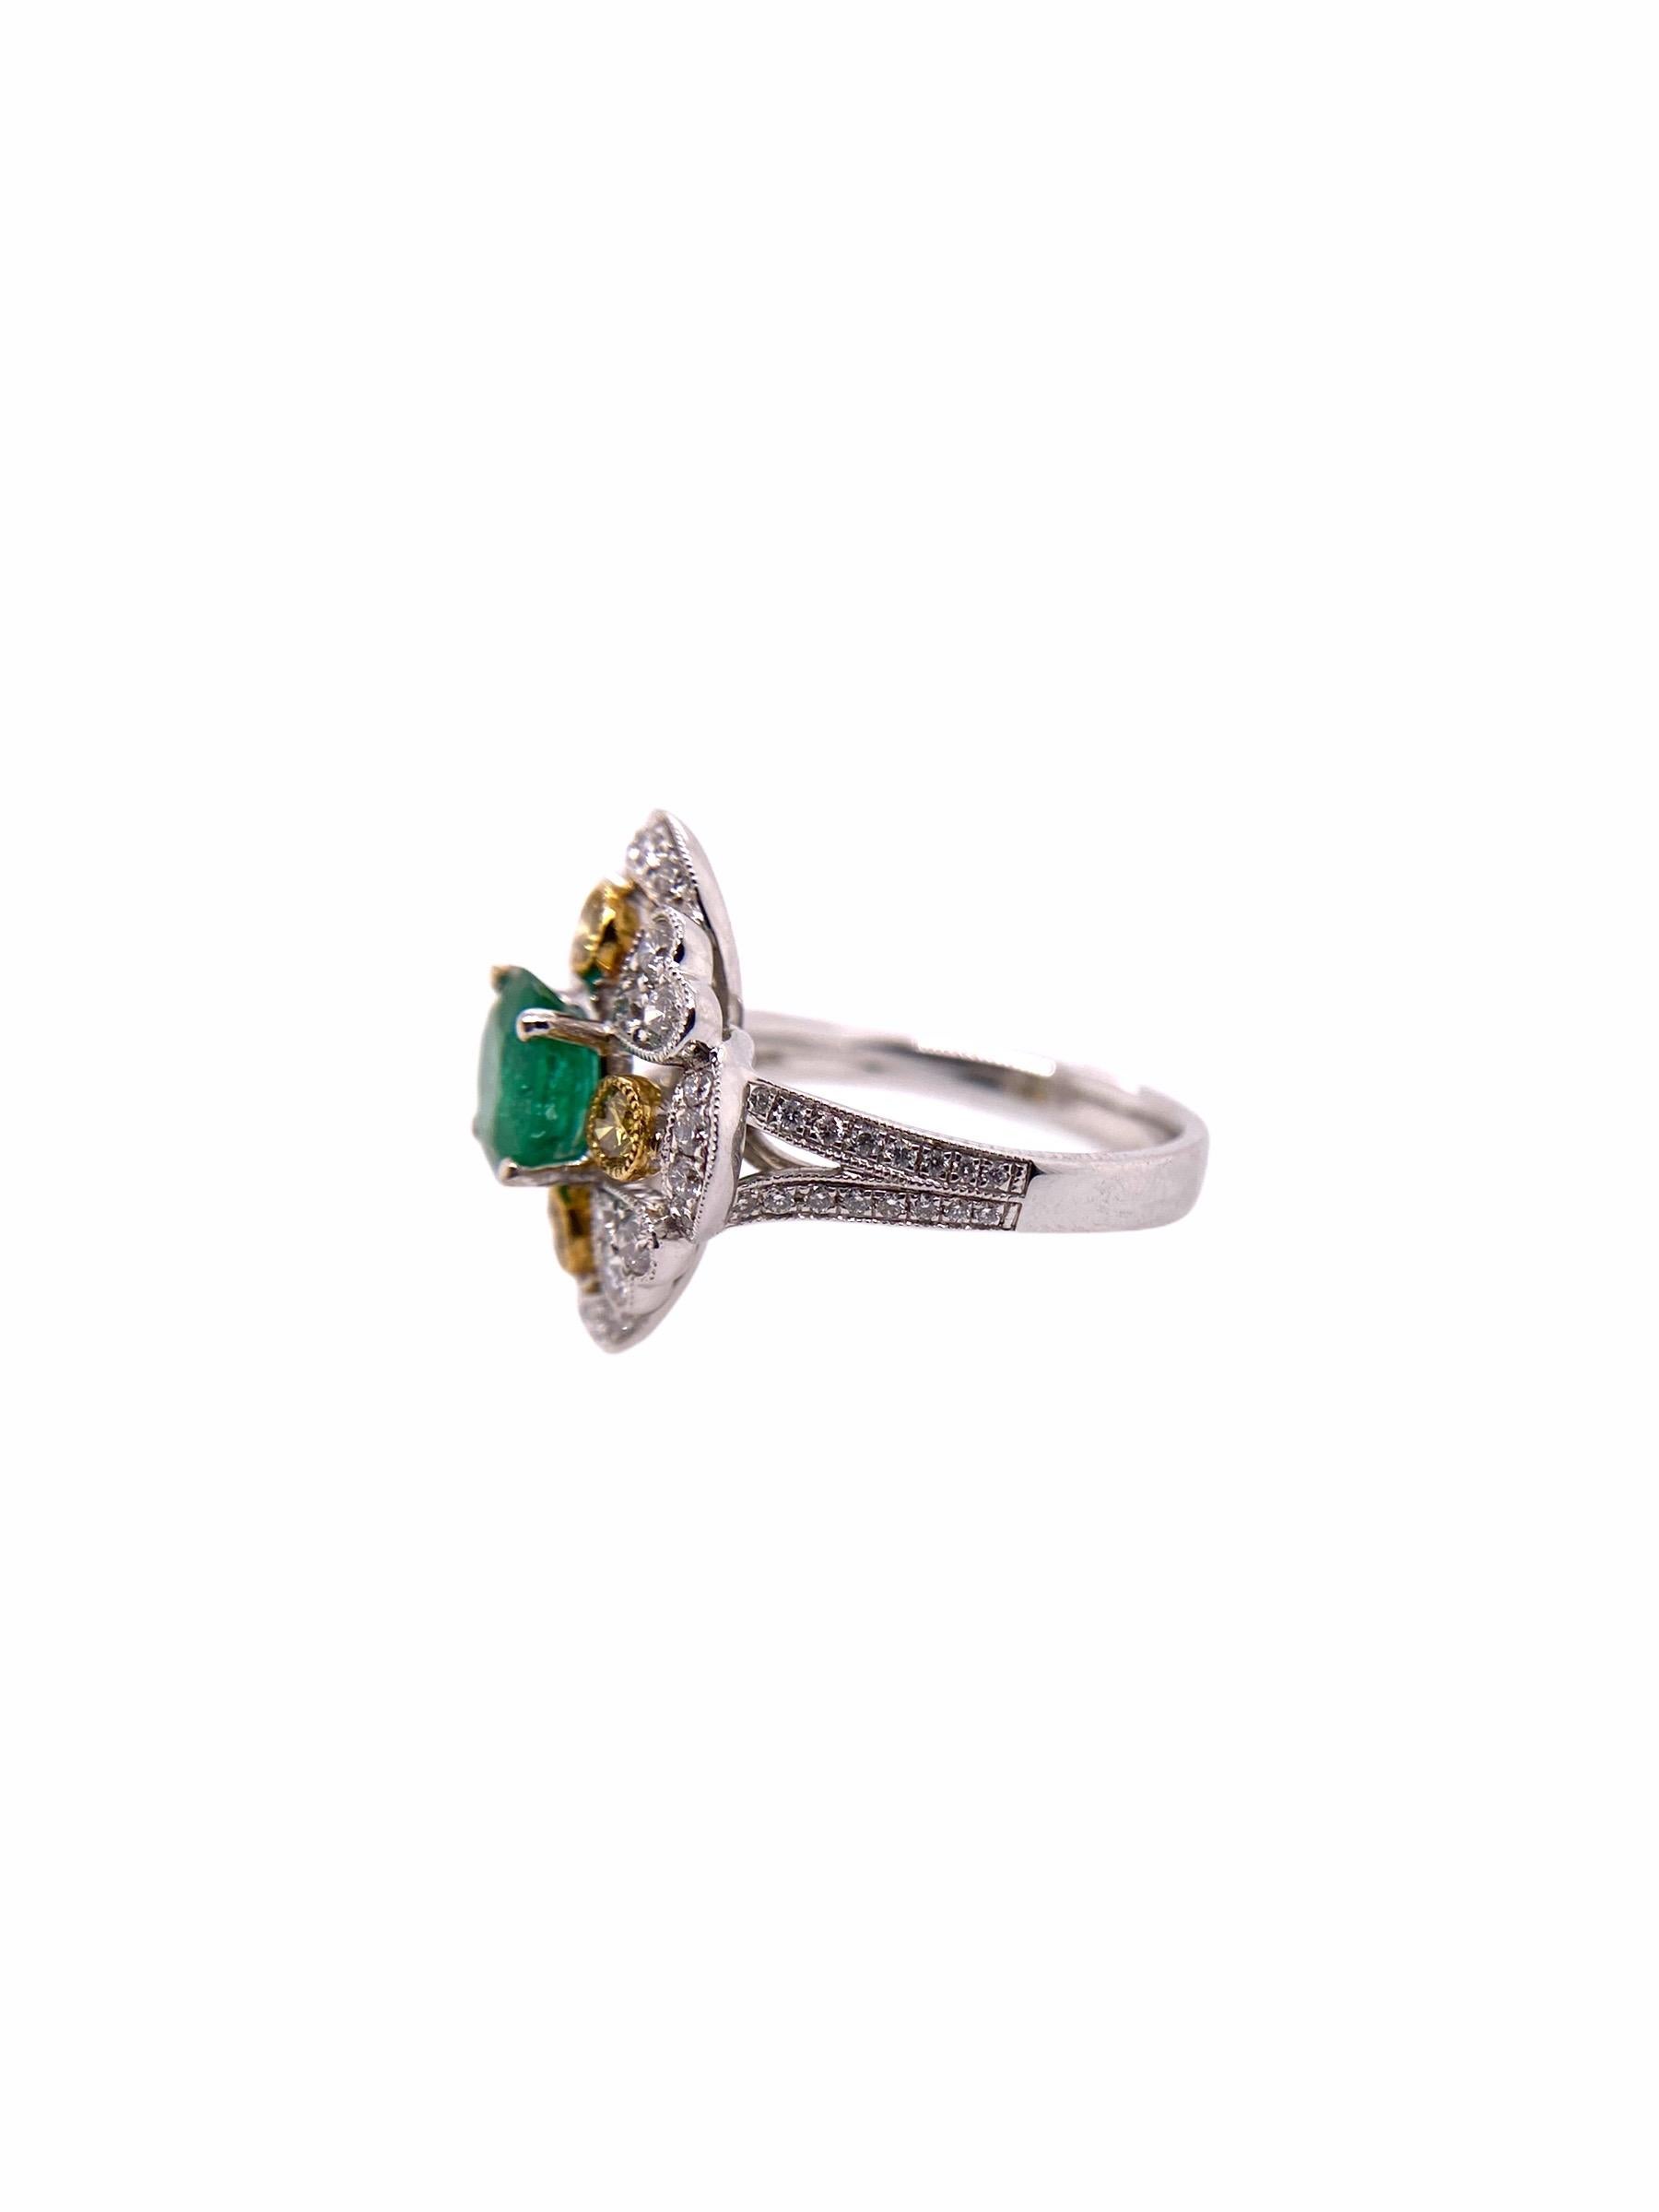 Paris Craft House Emerald Yellow Diamond Filigree Ring in 18 Karat White Gold In New Condition For Sale In Hong Kong, HK